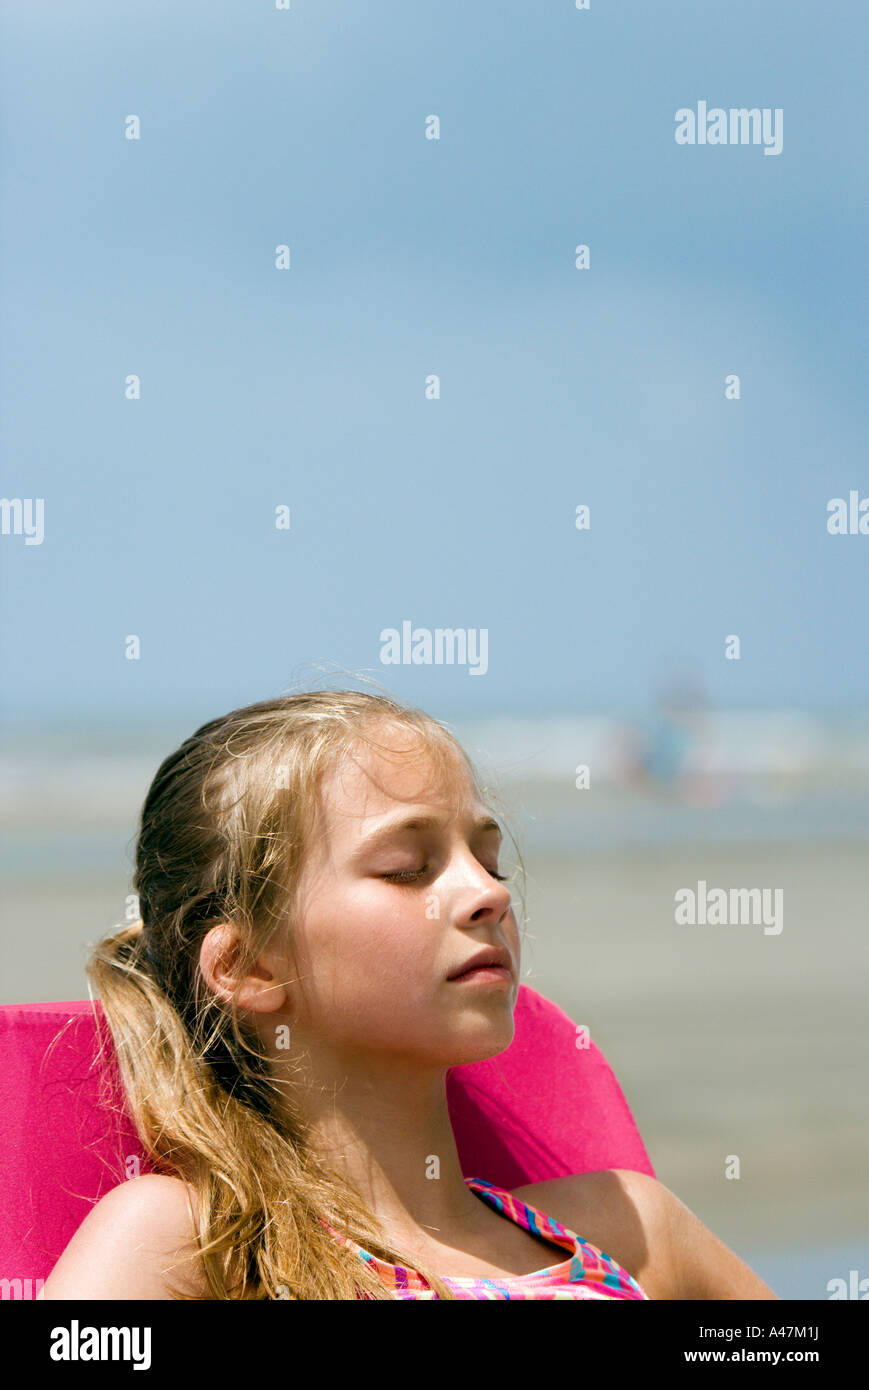 Girl relaxing in chair at beach Photo Stock - Alamy